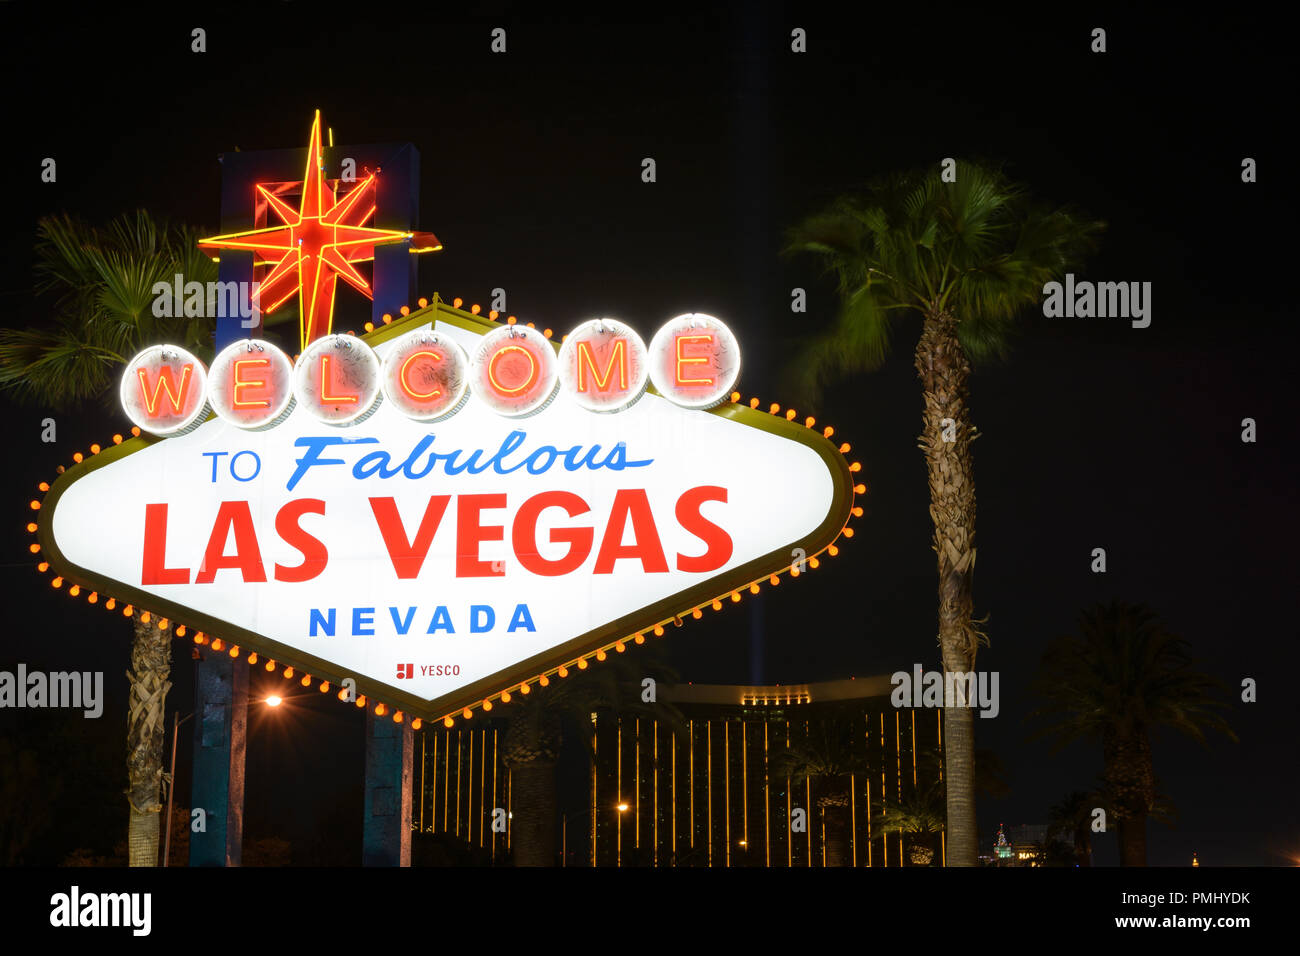 The Welcome To Las Vegas Sign At Night With Palm Trees In The Background Stock Photo